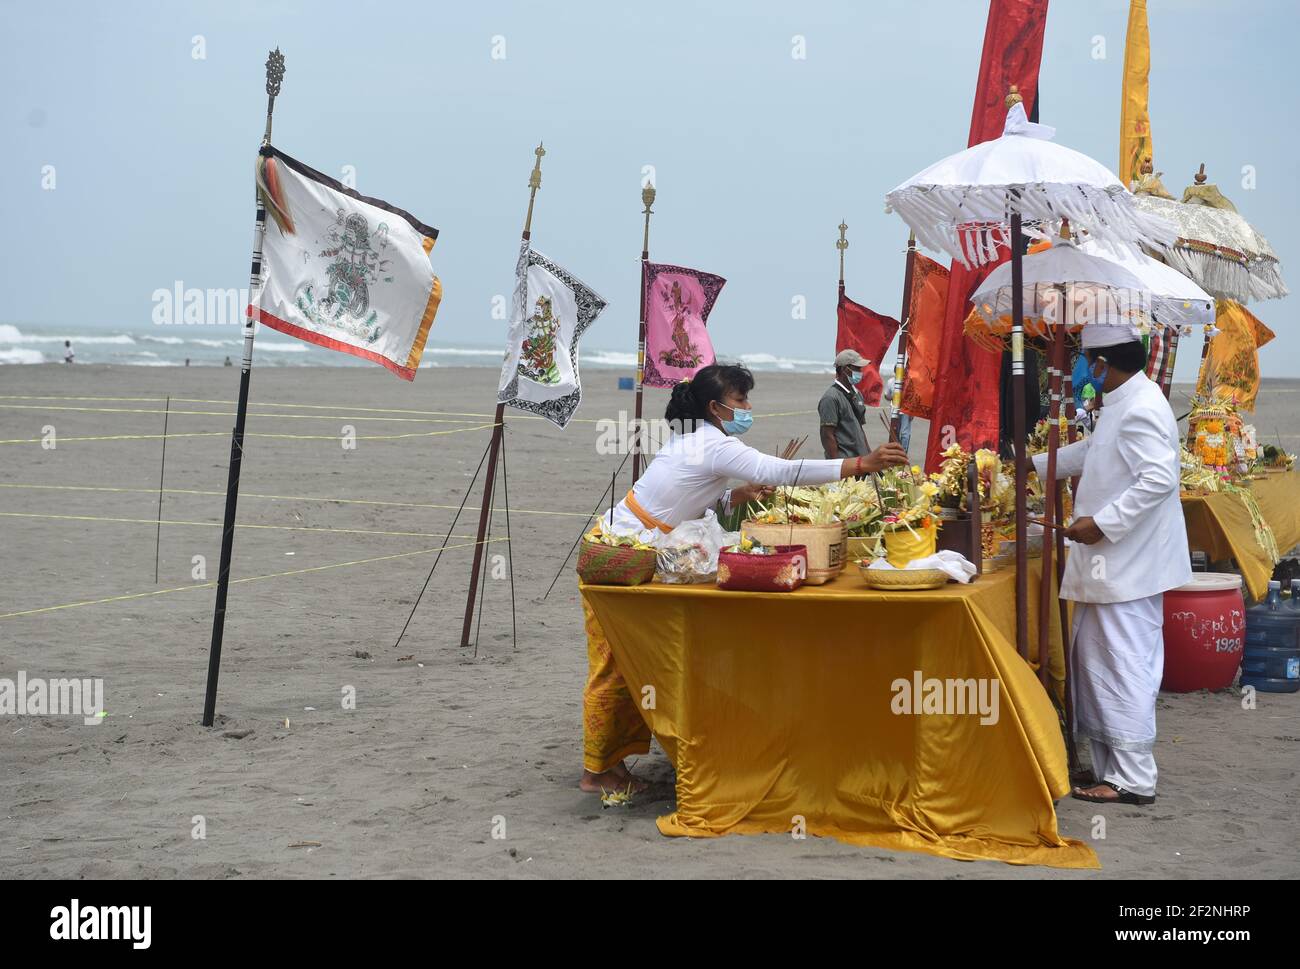 People in Yogyakarta carry out the Melasti ceremony, adhering to various health protocols due to Covid 19. Melasti is a Hindu Balinese purification ce Stock Photo